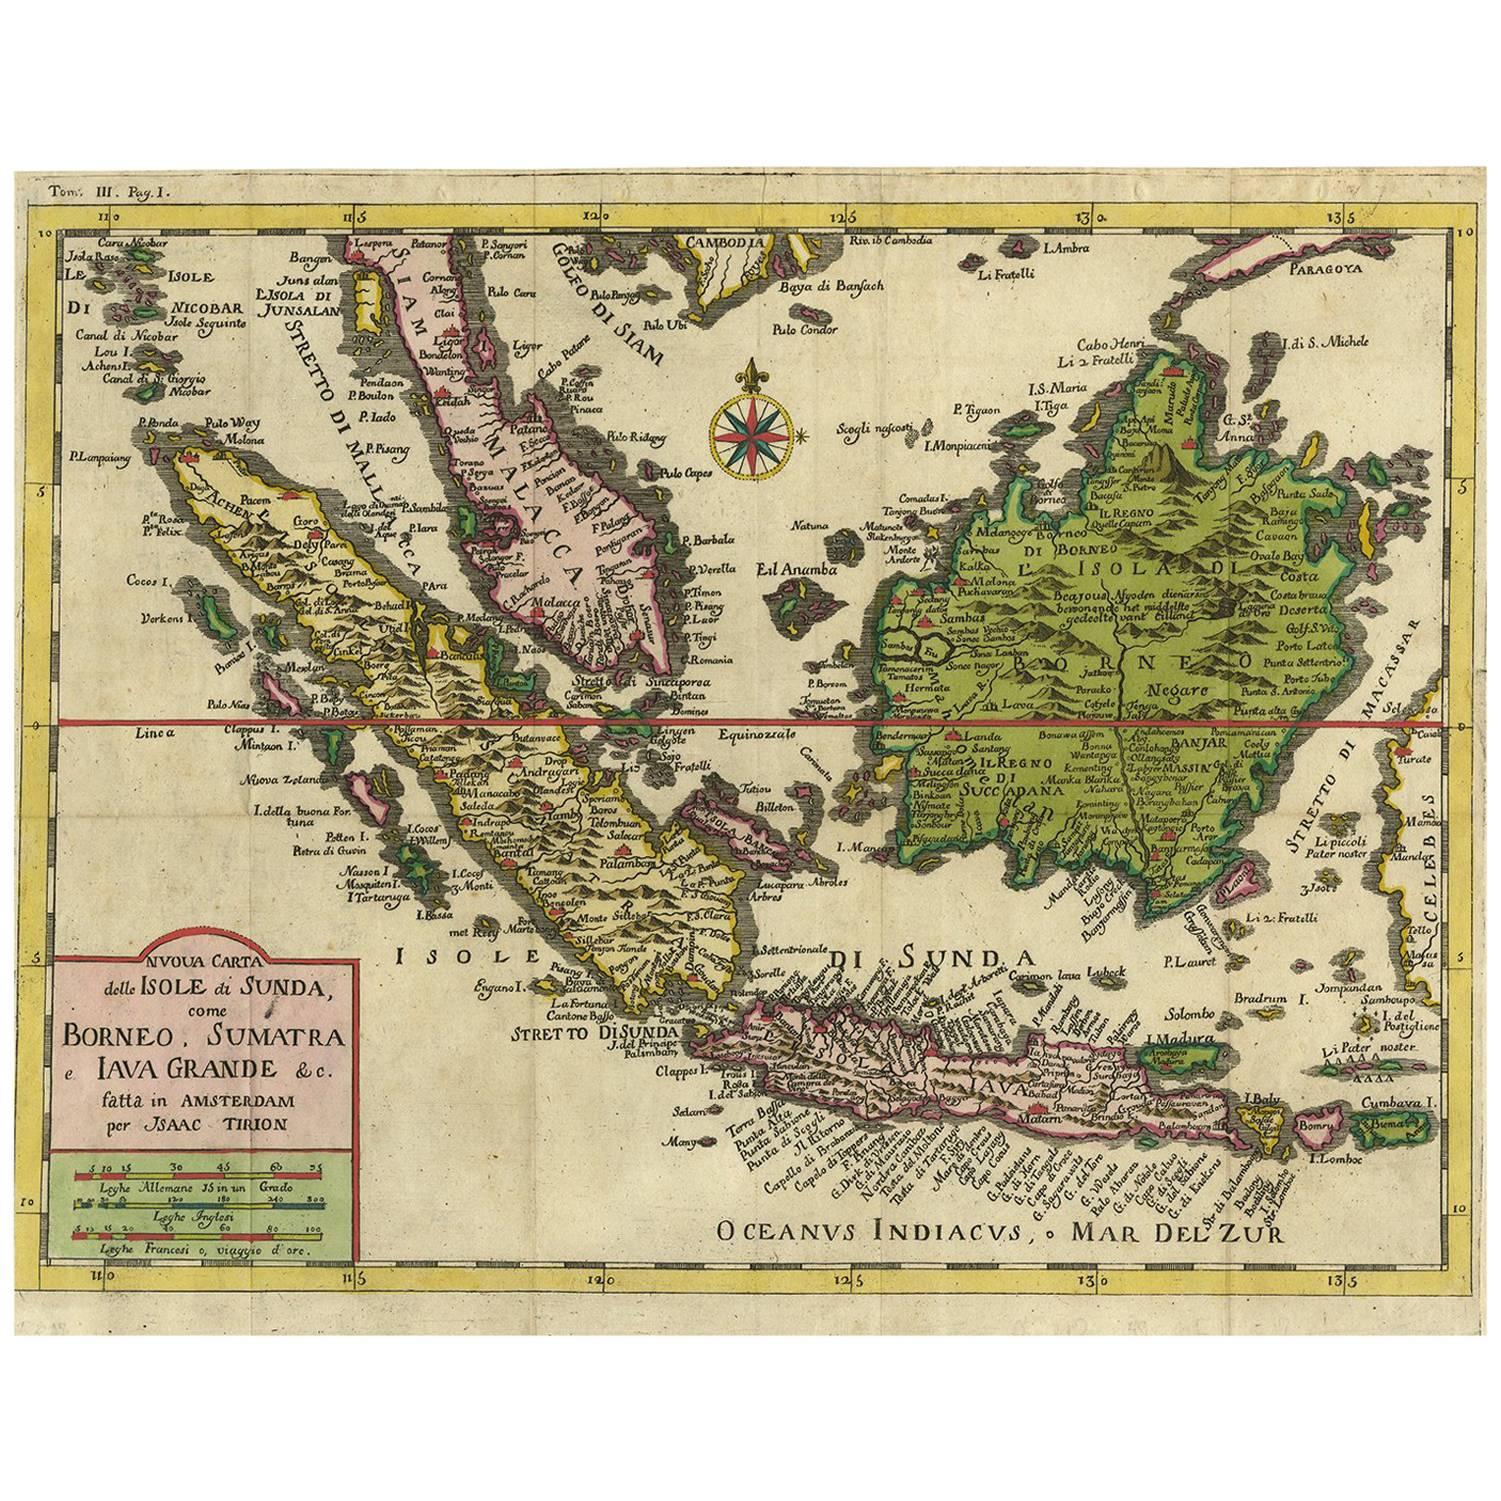 Antique Map of Borneo, Sumatra and Java 'Indonesia, Asia' by I. Tirion